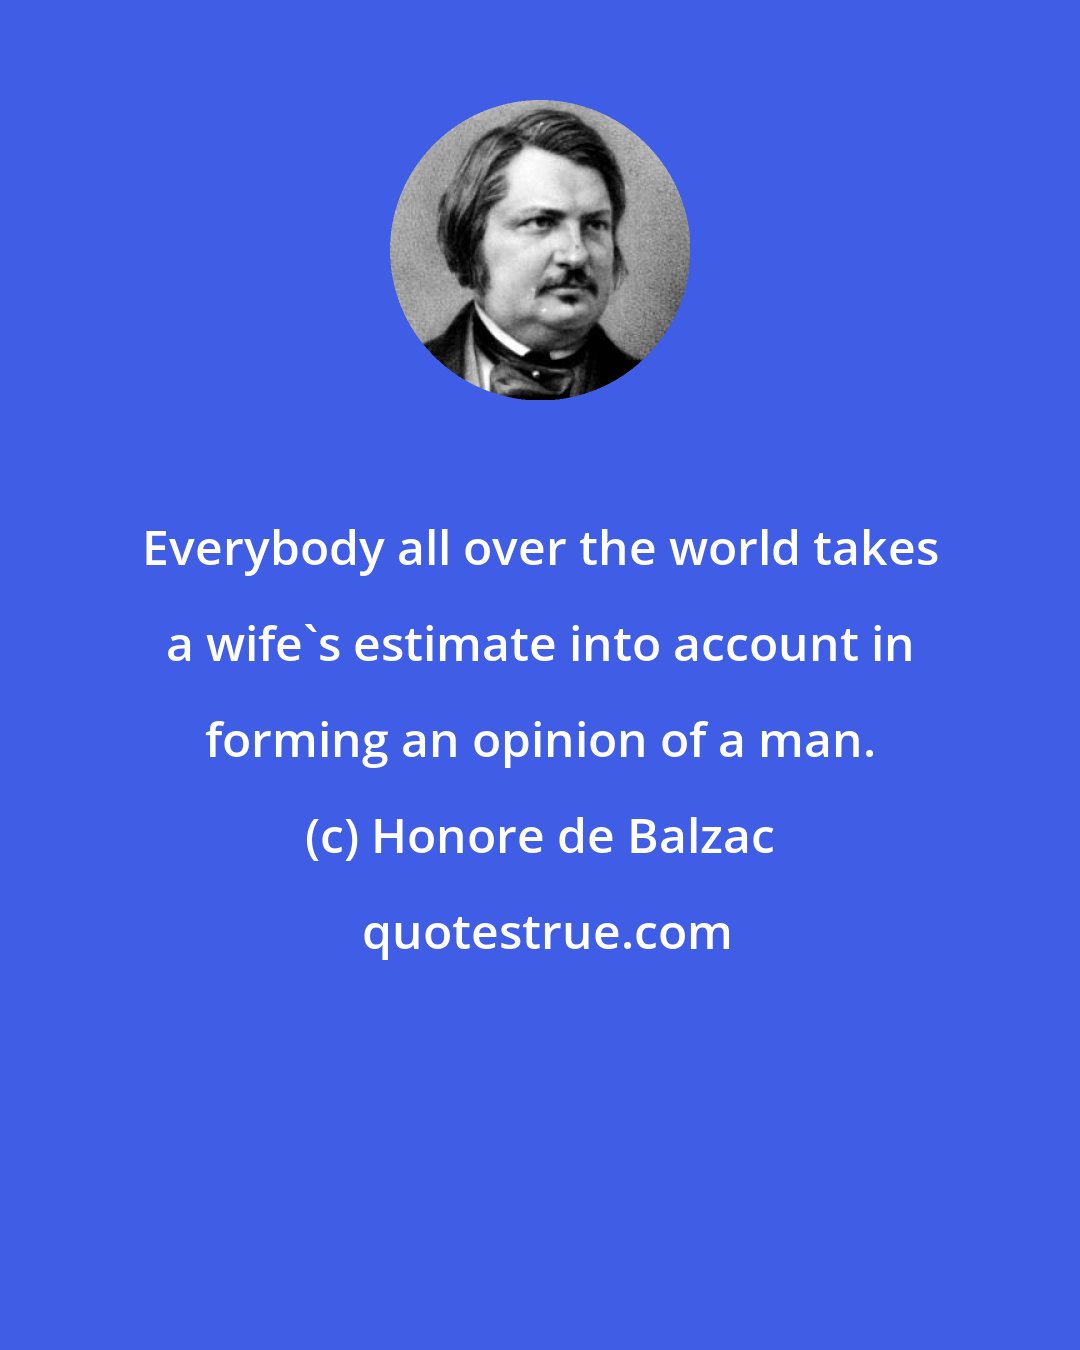 Honore de Balzac: Everybody all over the world takes a wife's estimate into account in forming an opinion of a man.